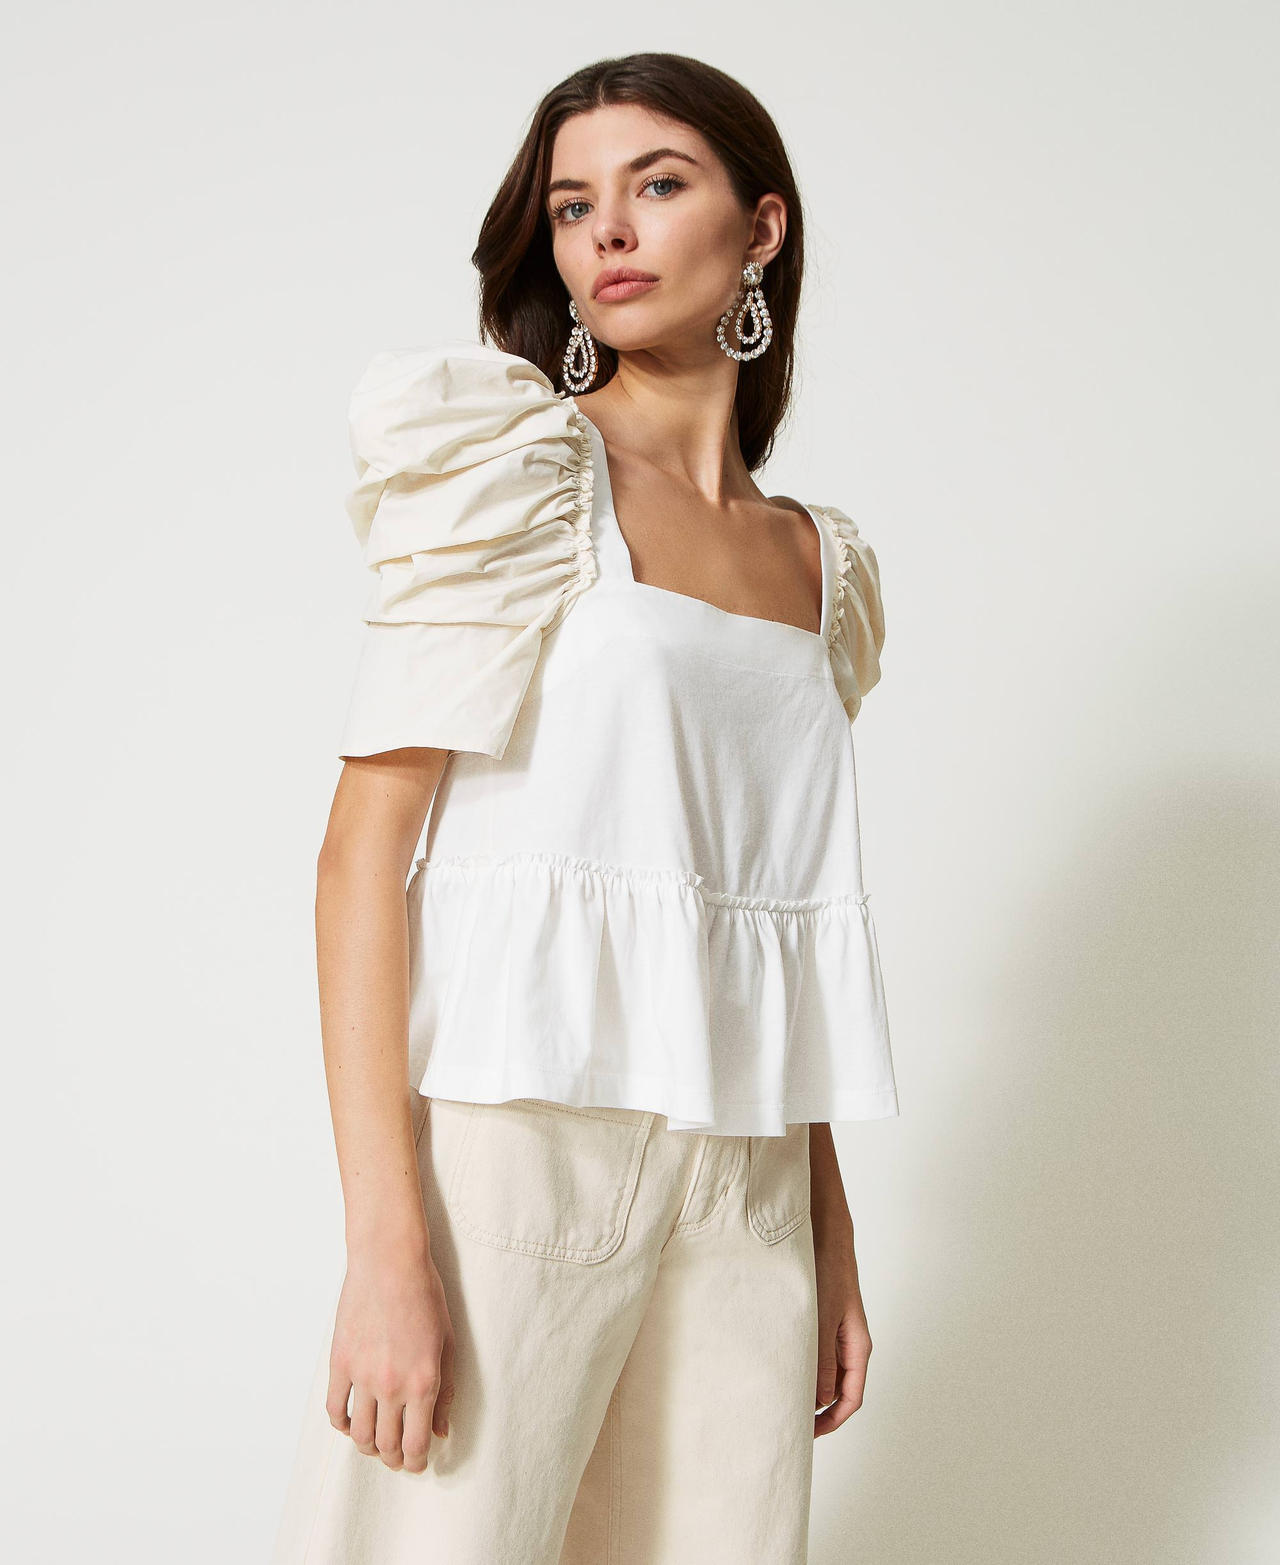 Blusa de popelina orgánica Bicolor Bright White / Chantilly Mujer 231AT2044-02